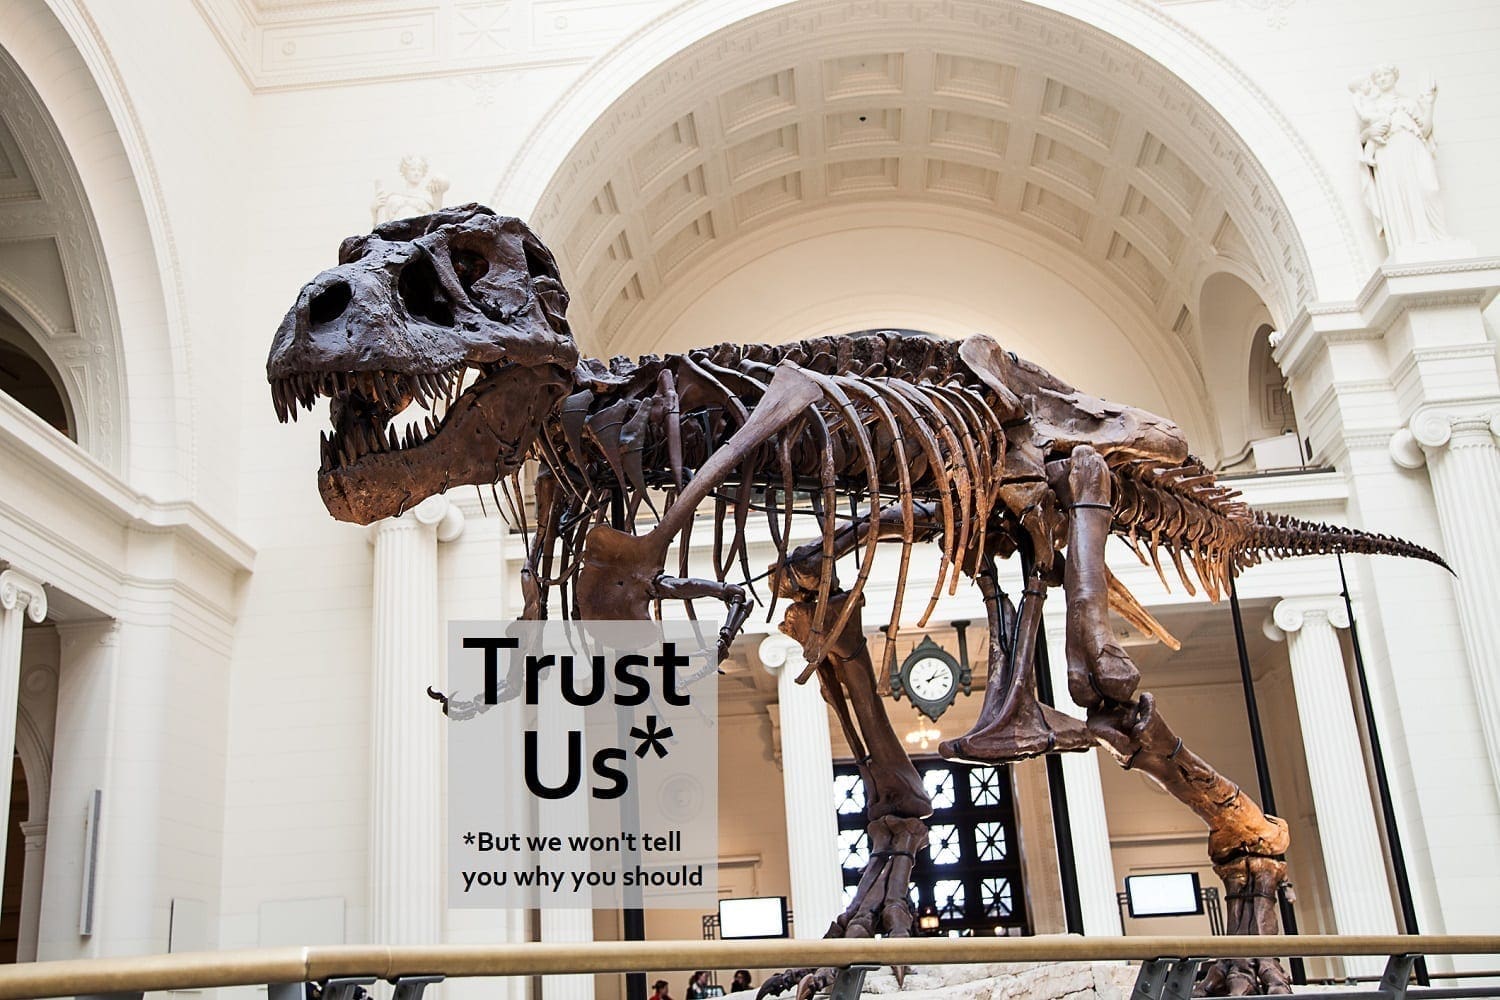 Sue the T.rex holding a 'sign' saying Trust Us, but we won't tell you why you should, adapted from: ID 27396520 © Cmlndm | Dreamstime.com